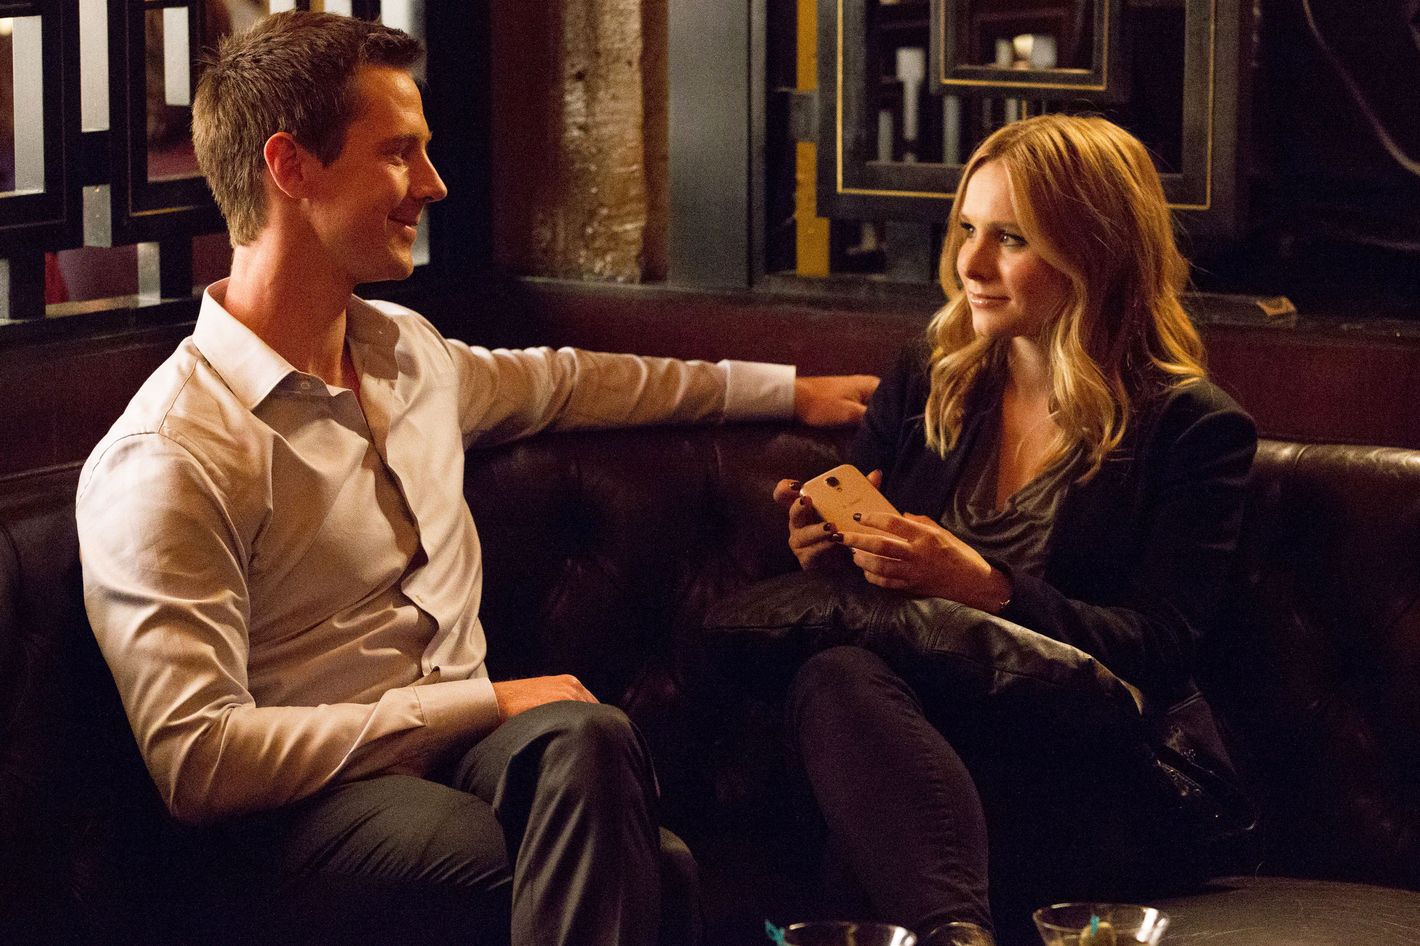 Check Out the First Pics From the Veronica Mars Movie